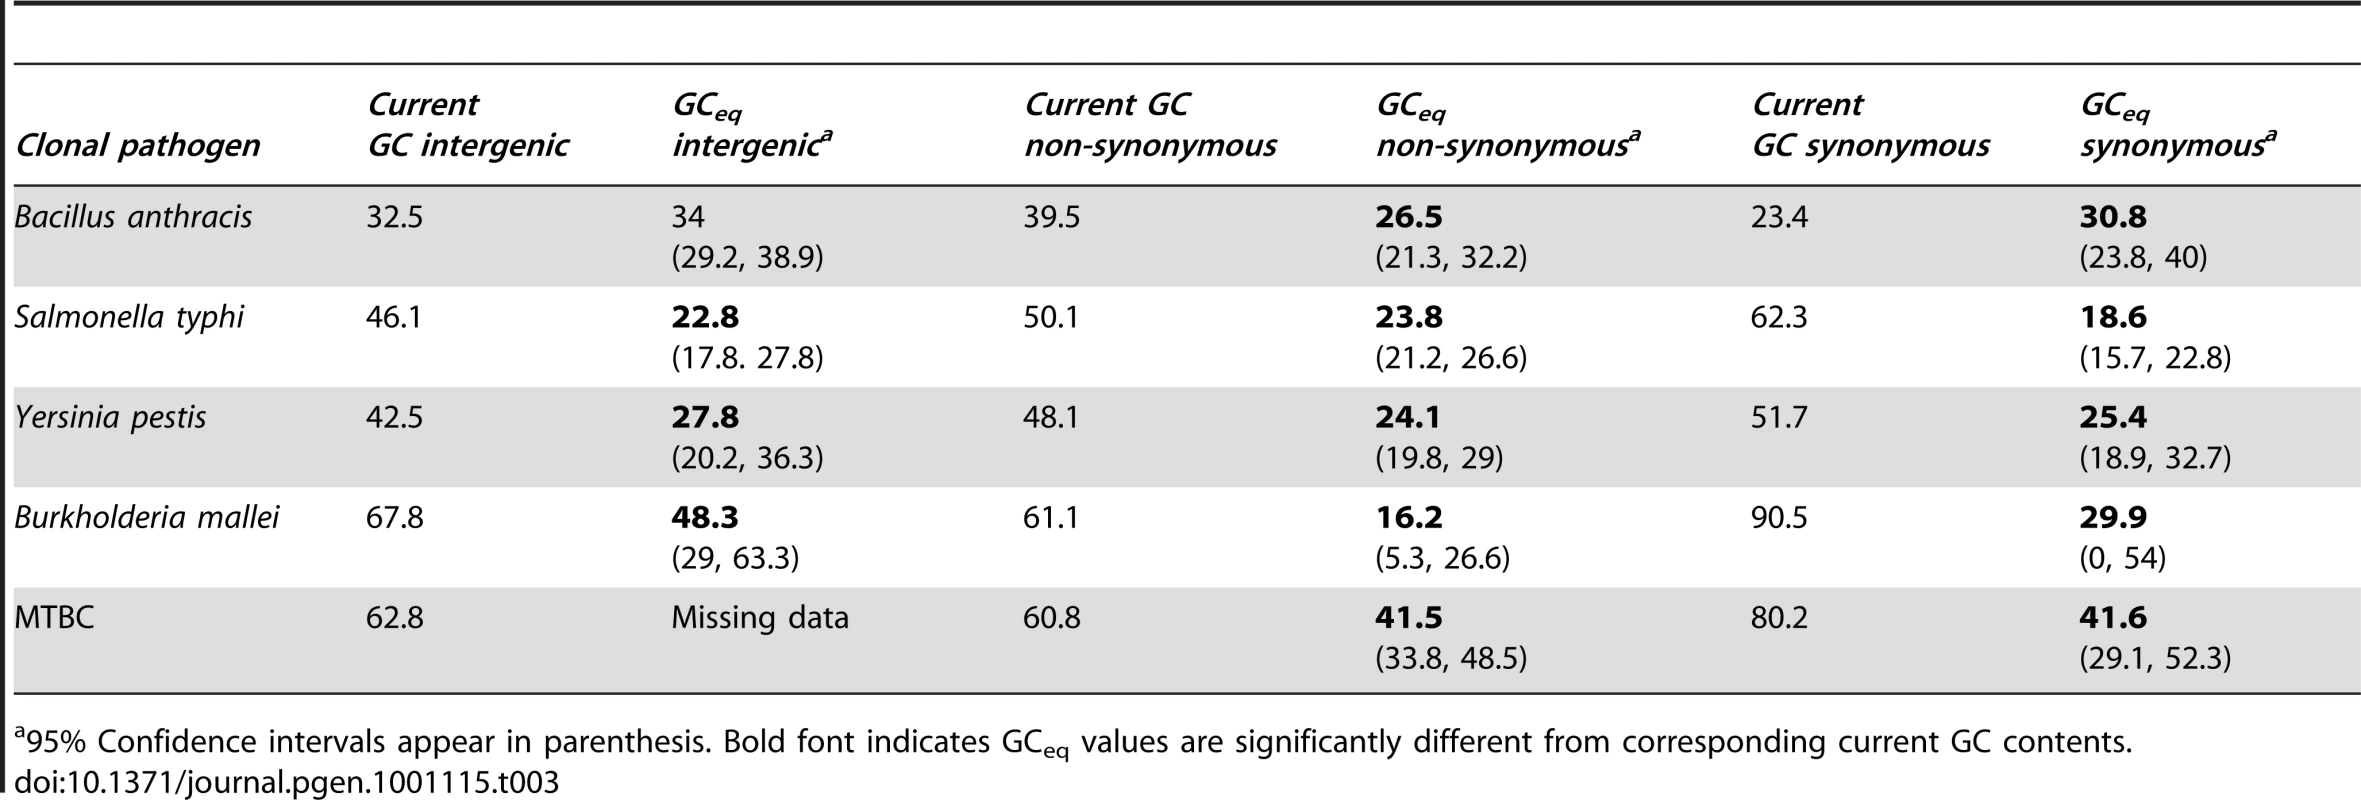 Comparisons of current GC content and GC<sub>eq</sub> for five clonal pathogen lineages.